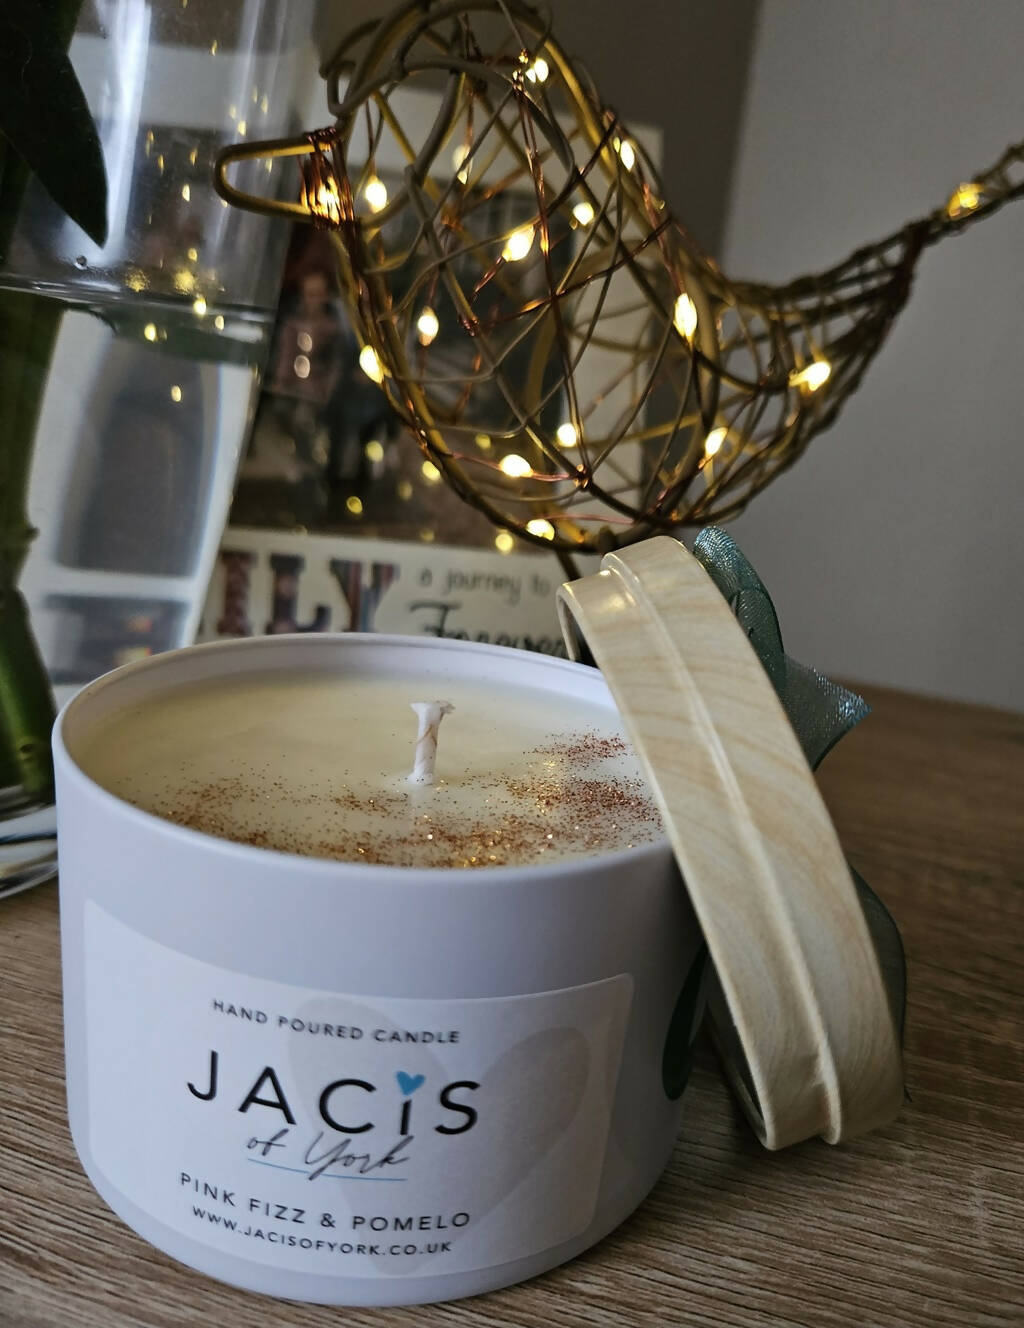 Jacis of York - Pink Fizz & Pomelo Scented Candle 230ml